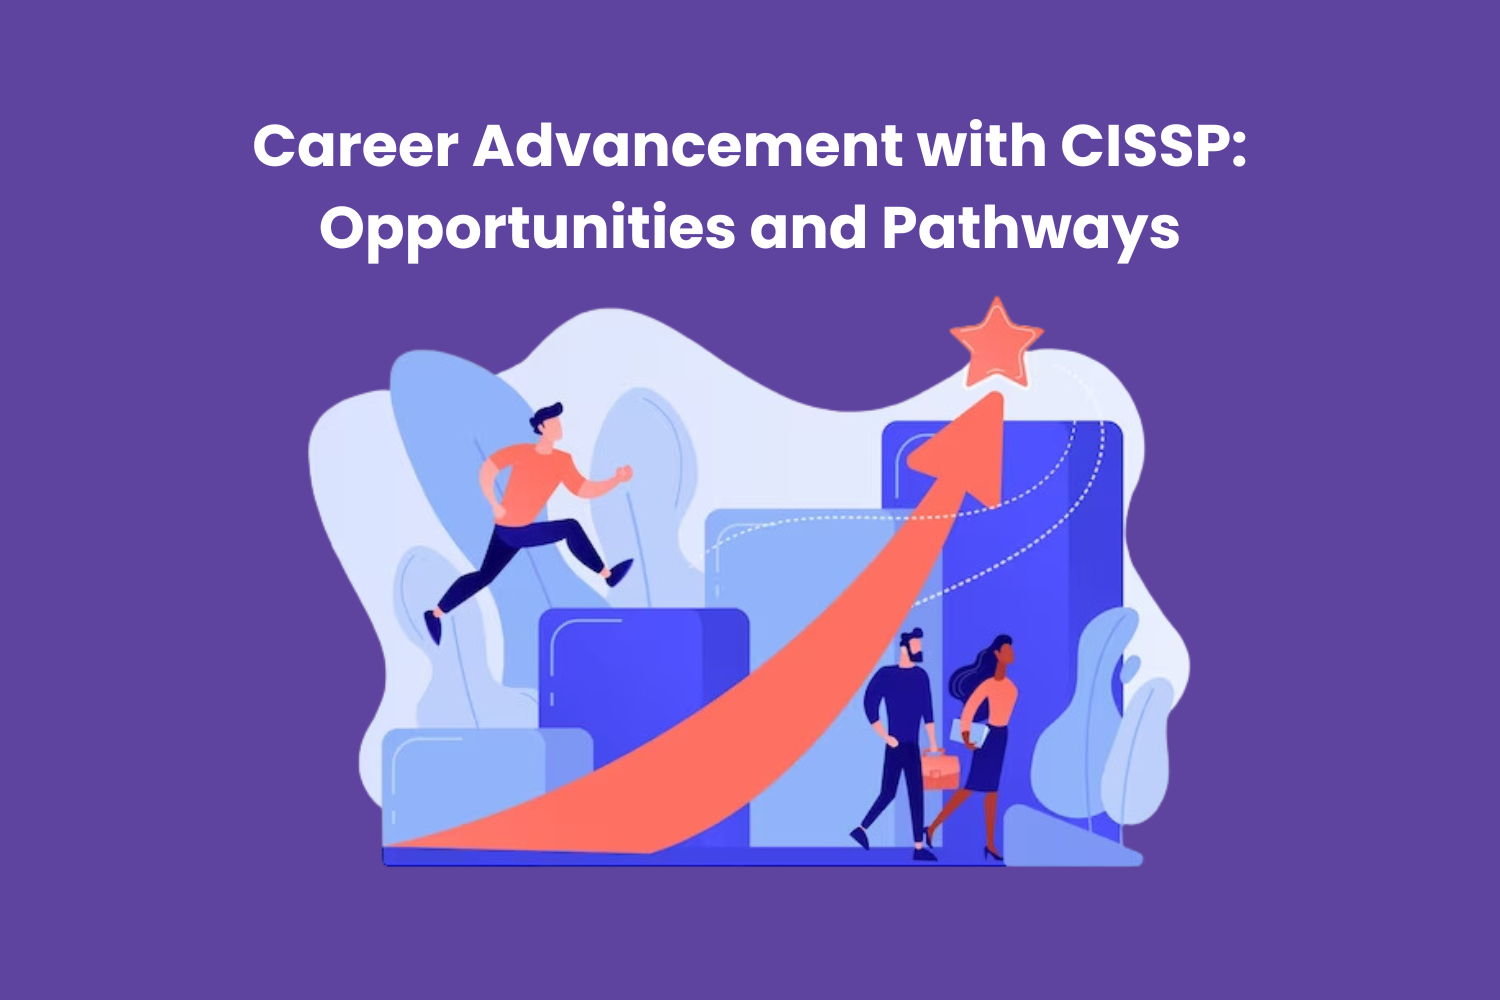 Career Advancement with CISSP: Opportunities and Pathways 